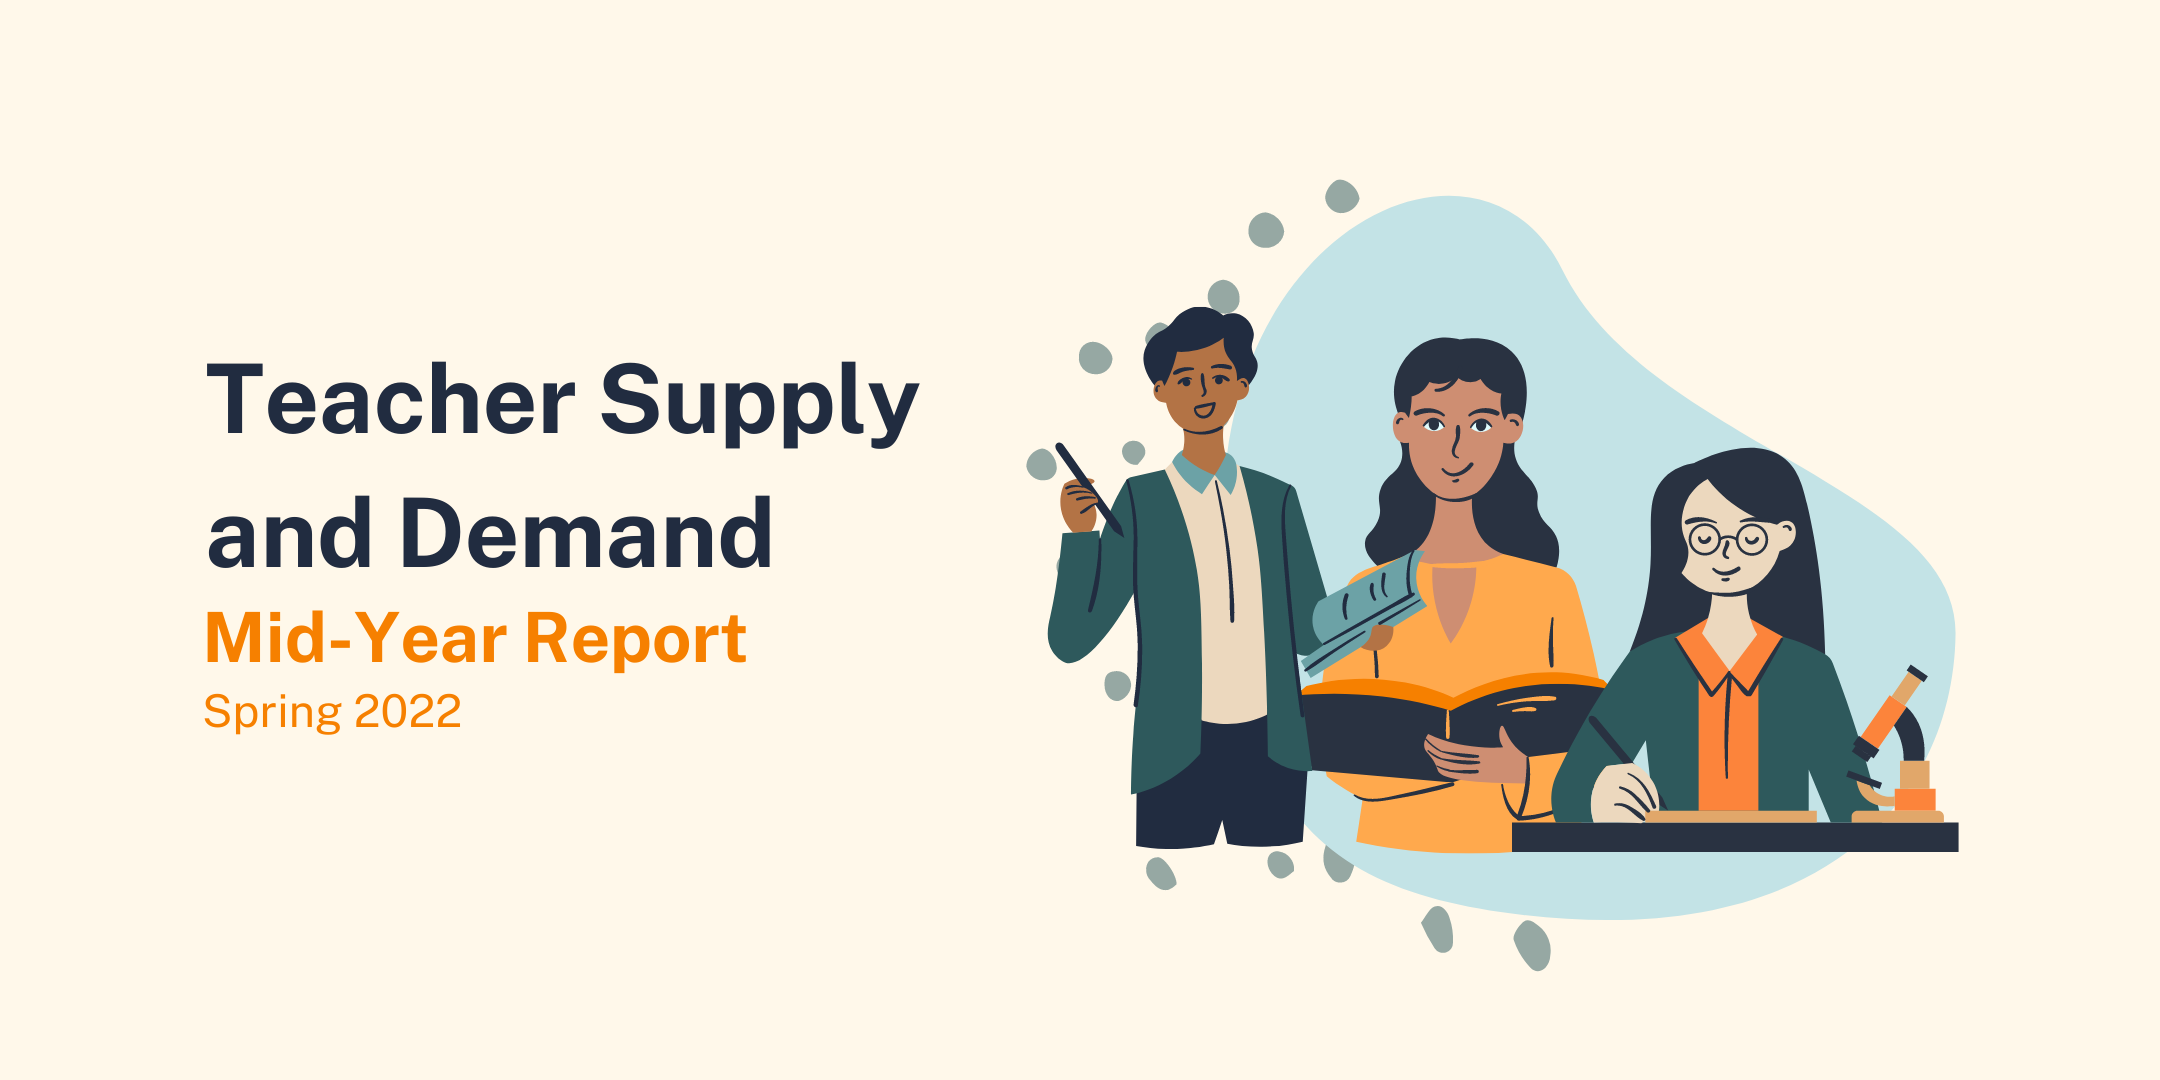 Teacher Supply and Demand: Mid-Year Report (Spring 2022)